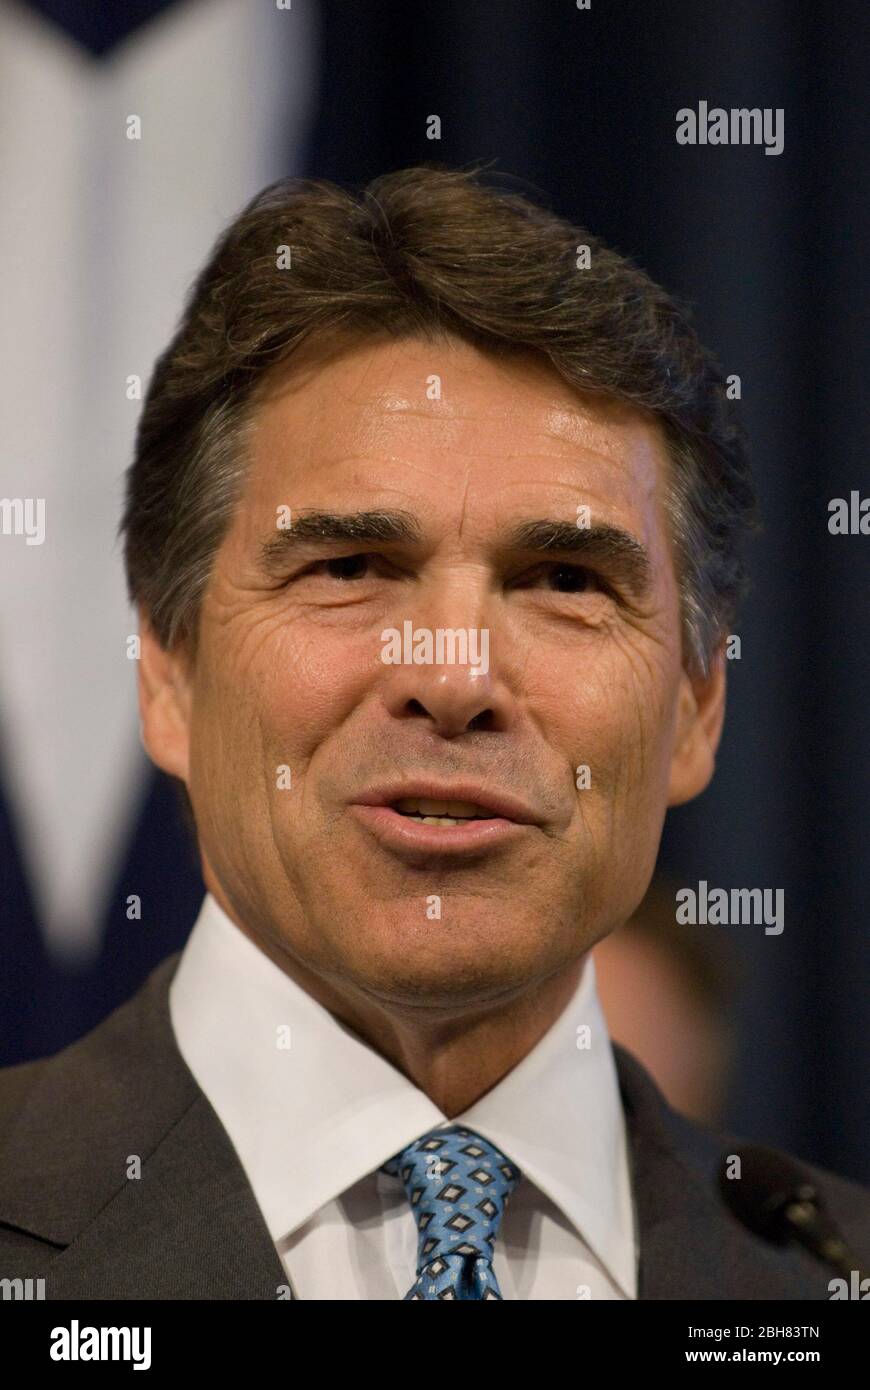 Austin , Texas - Texas Governor Rick Perry speaks at press conference announcing the findings of at Texas Public Policy Foundation studey about health care reform. August 18th, 2009  ©Marjorie Kamys Cotera / Daemmrich Photos Stock Photo